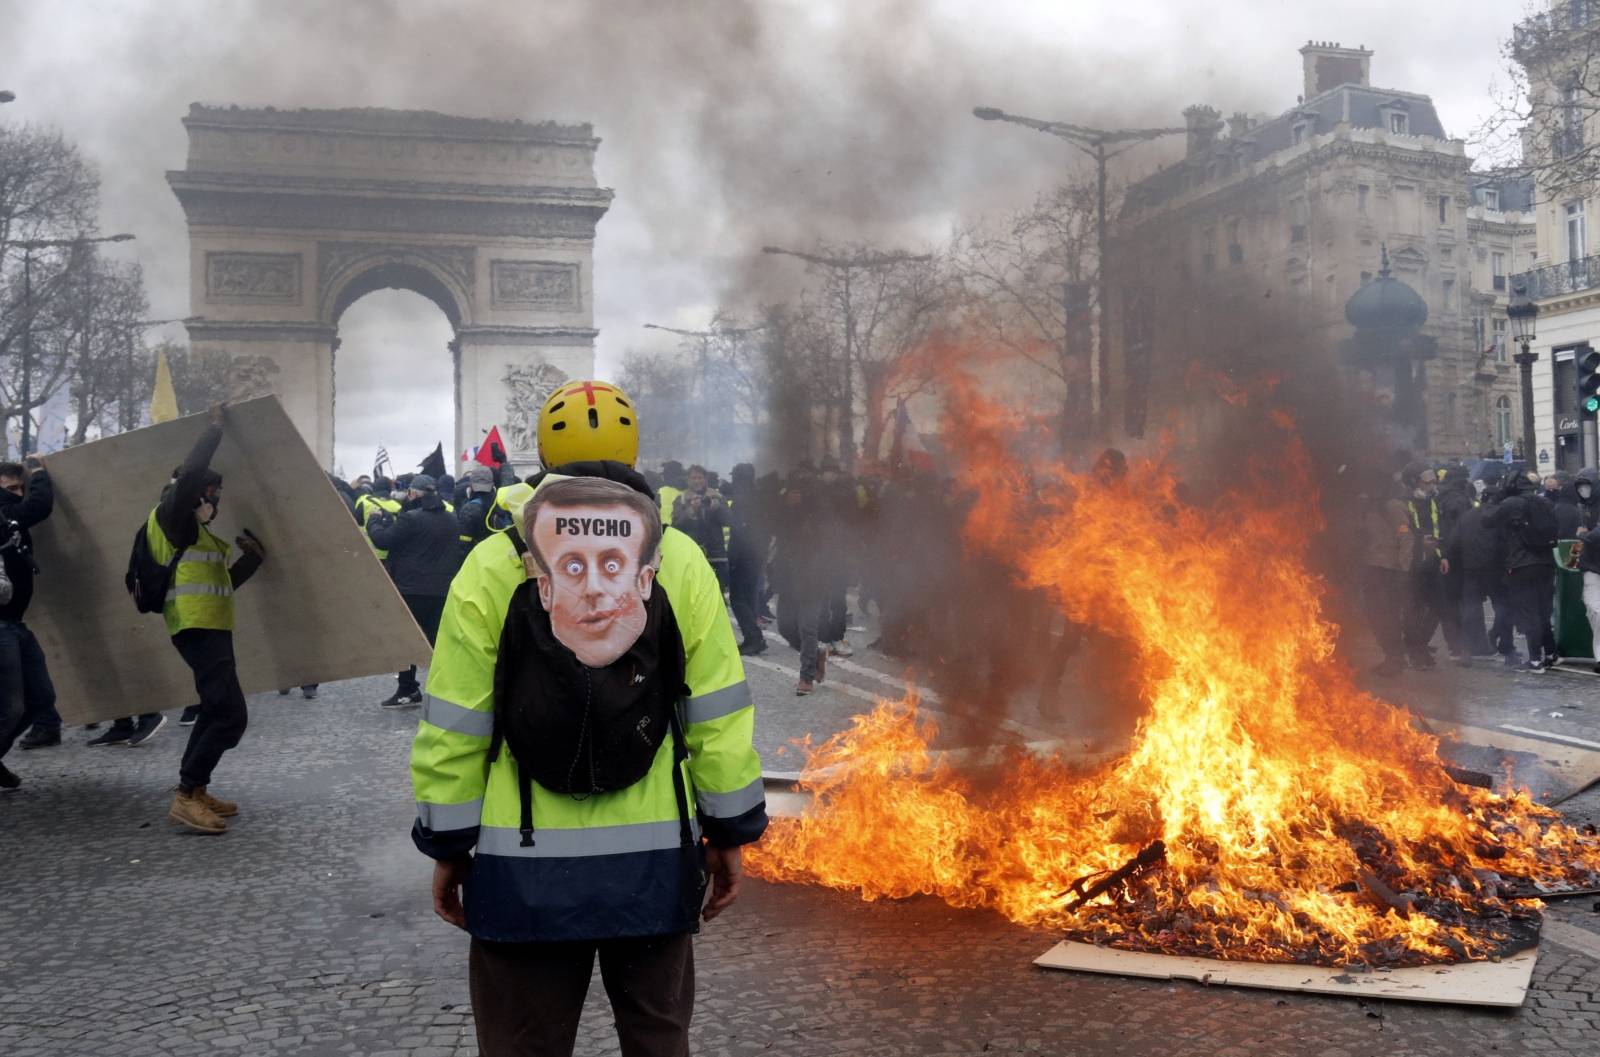 A demonstrator stands near a burning barricade during a demonstration by "yellow vests" in Paris